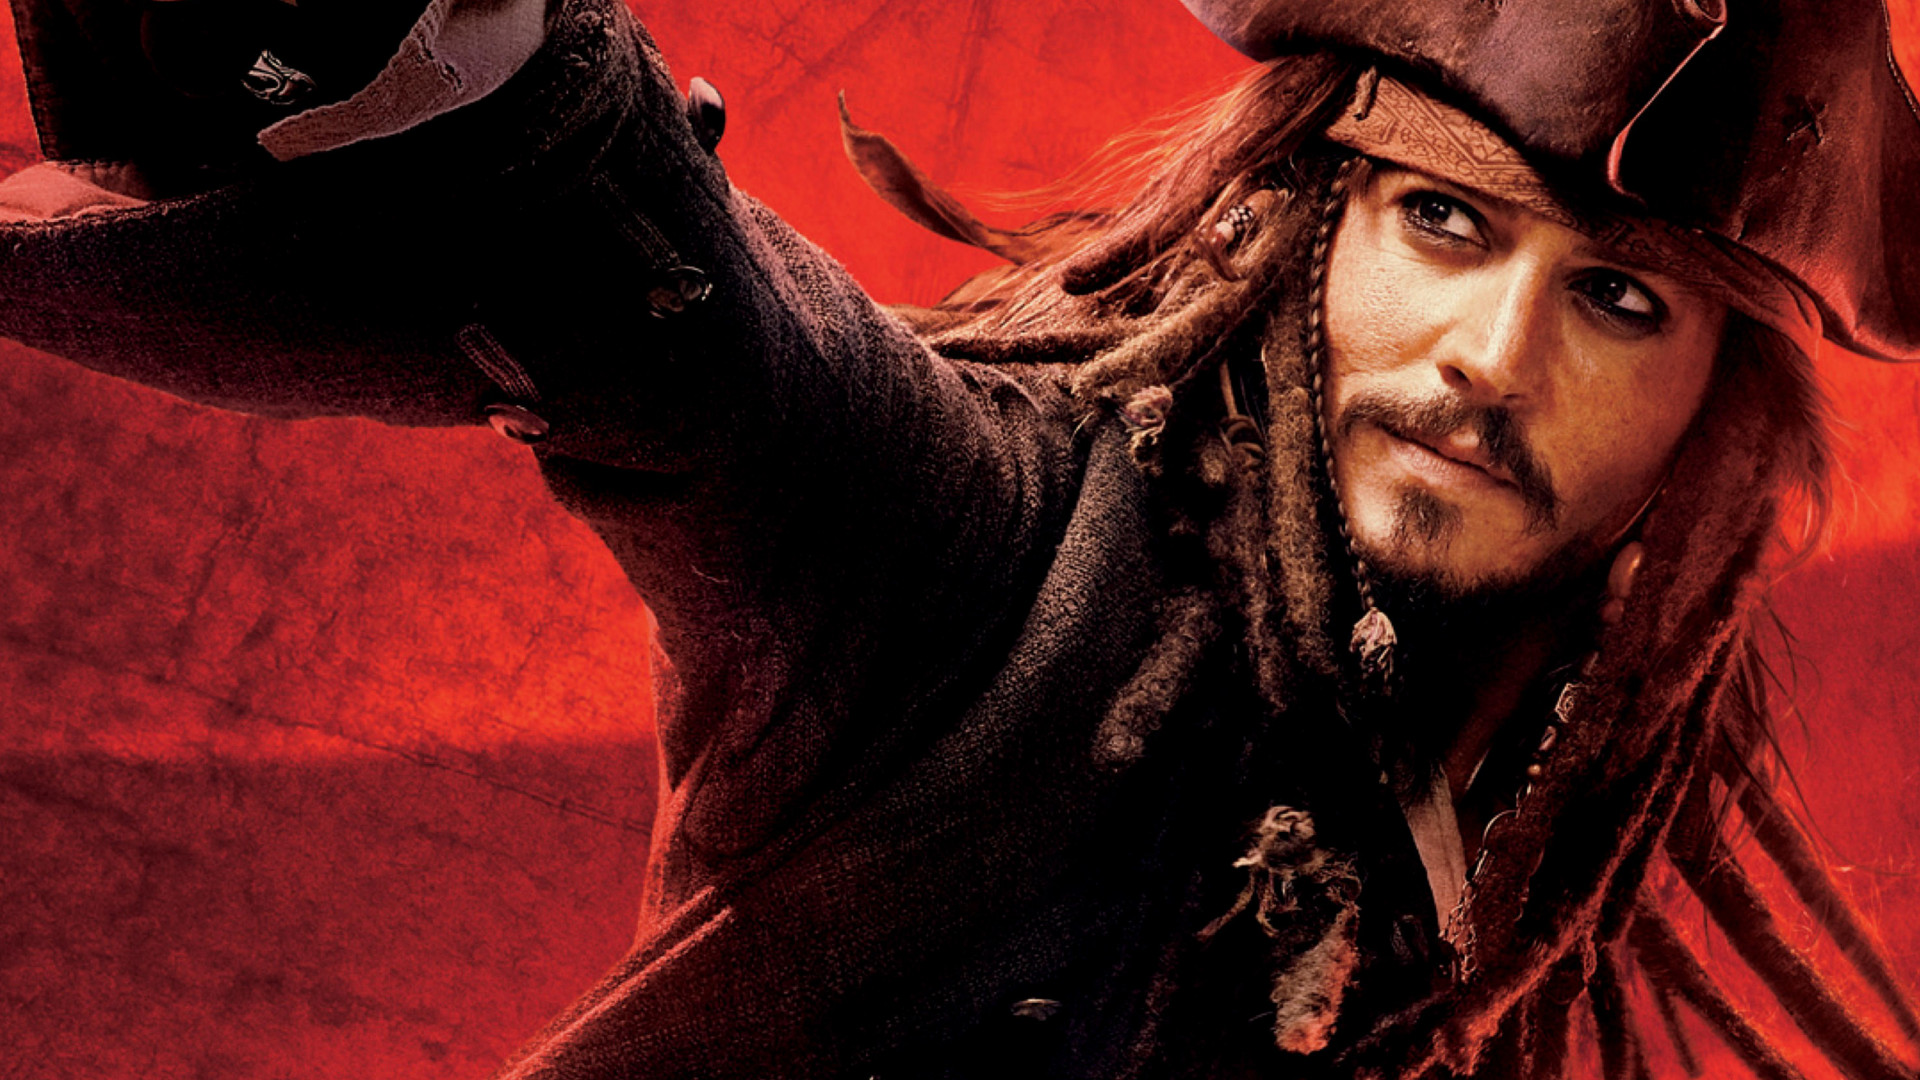 movie, pirates of the caribbean: at world's end, jack sparrow, johnny depp, pirates of the caribbean 2160p